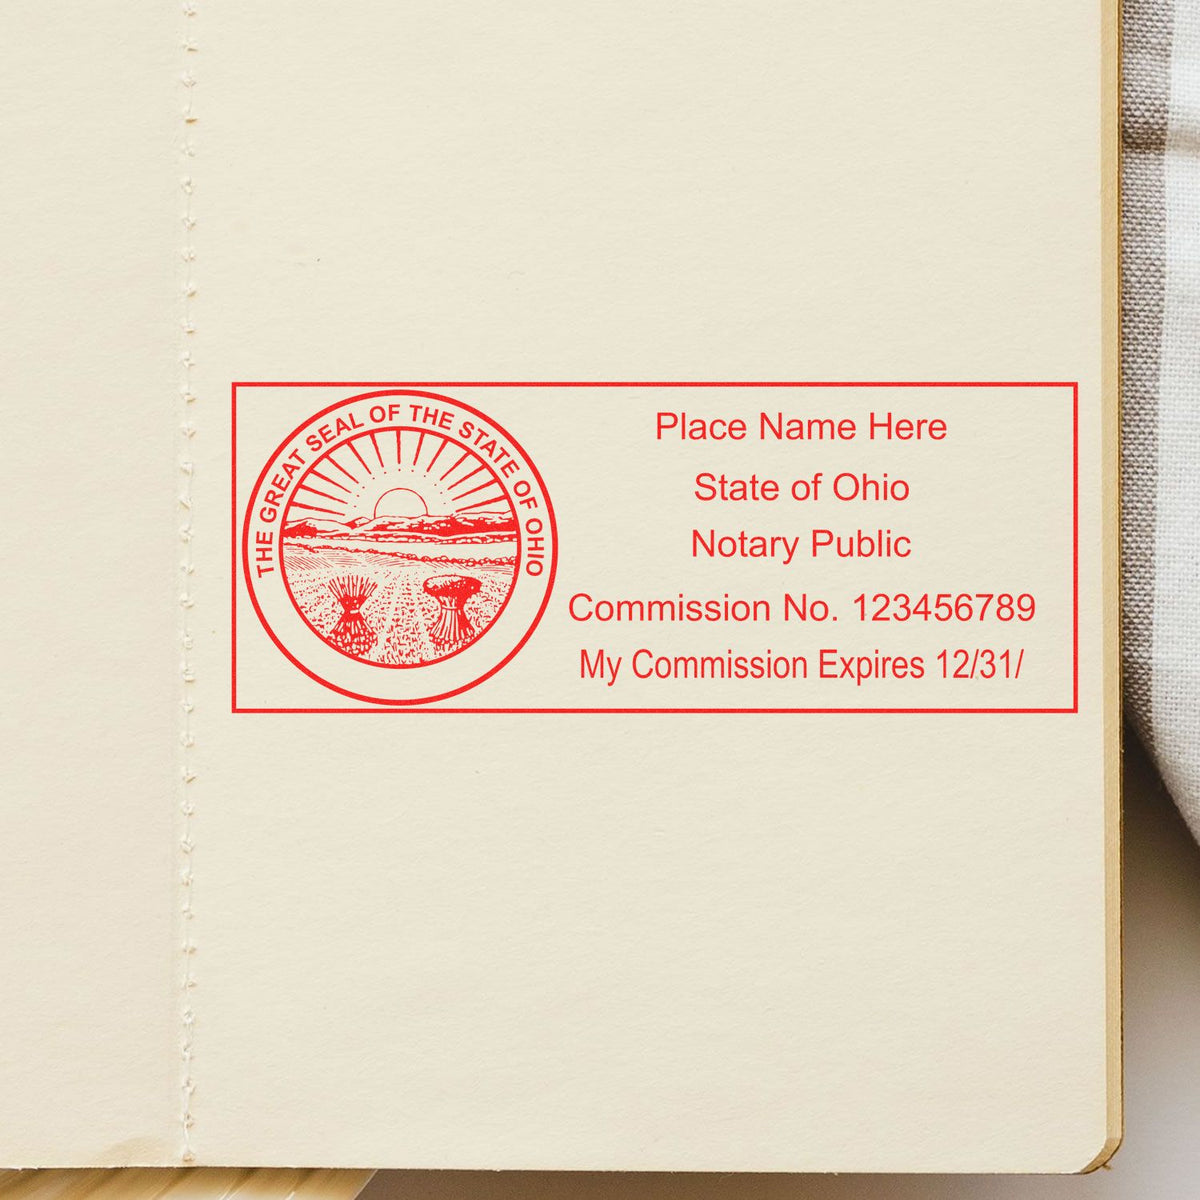 The Heavy-Duty Ohio Rectangular Notary Stamp stamp impression comes to life with a crisp, detailed photo on paper - showcasing true professional quality.